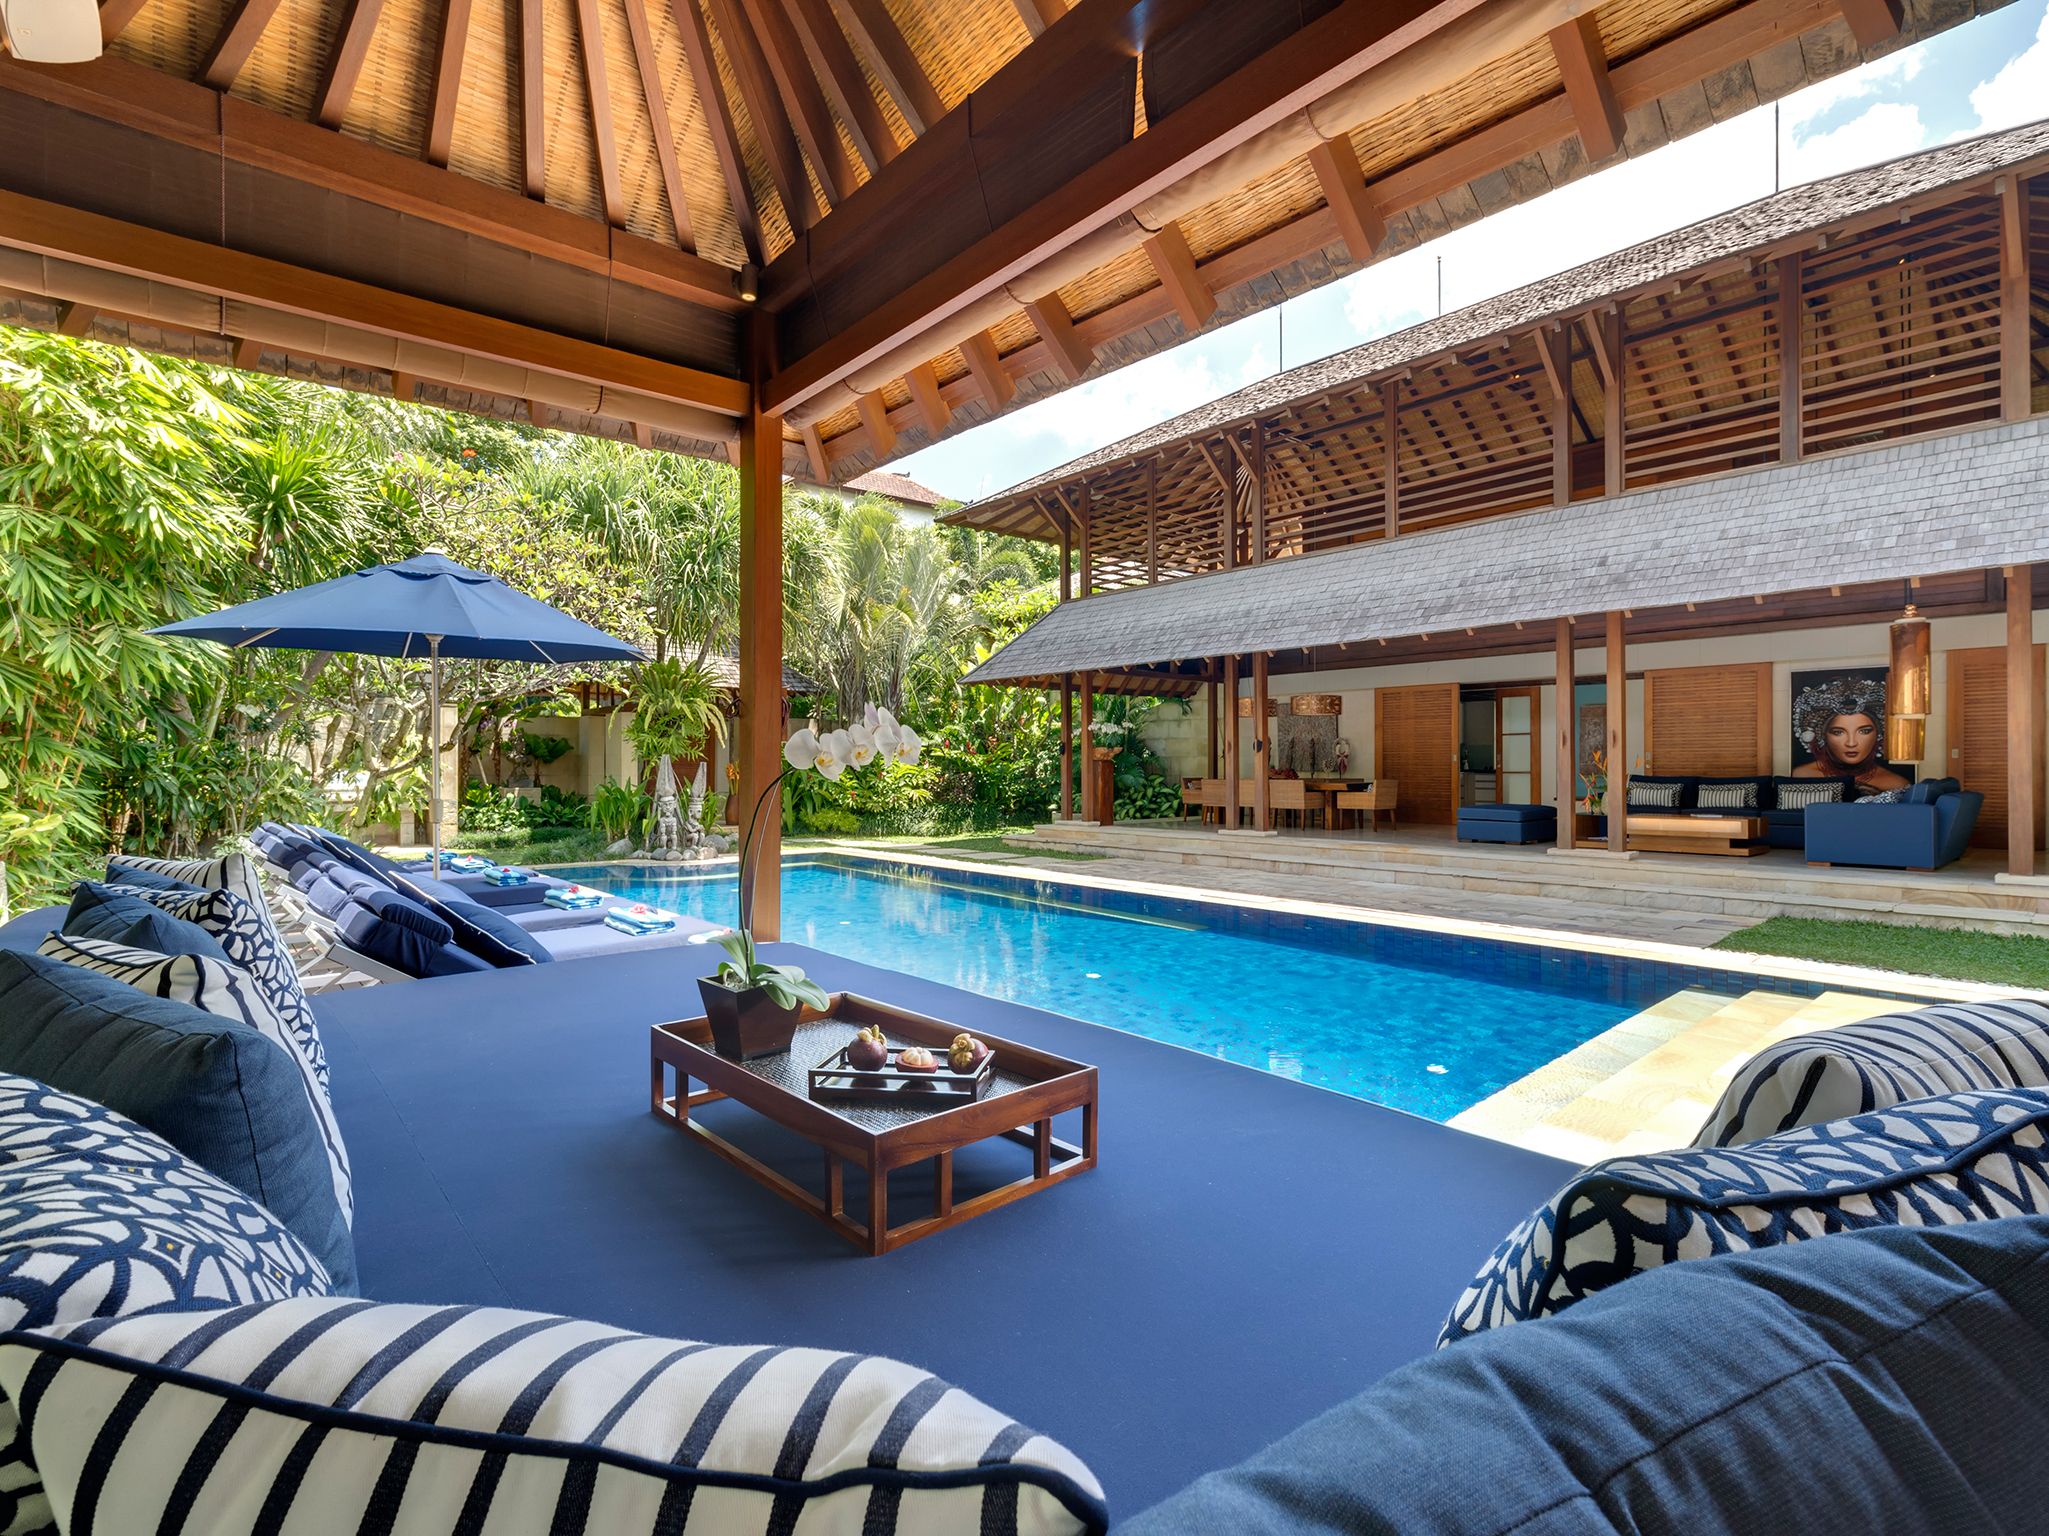 Villa Windu Sari - Pool bale perfect for chilling by the pool